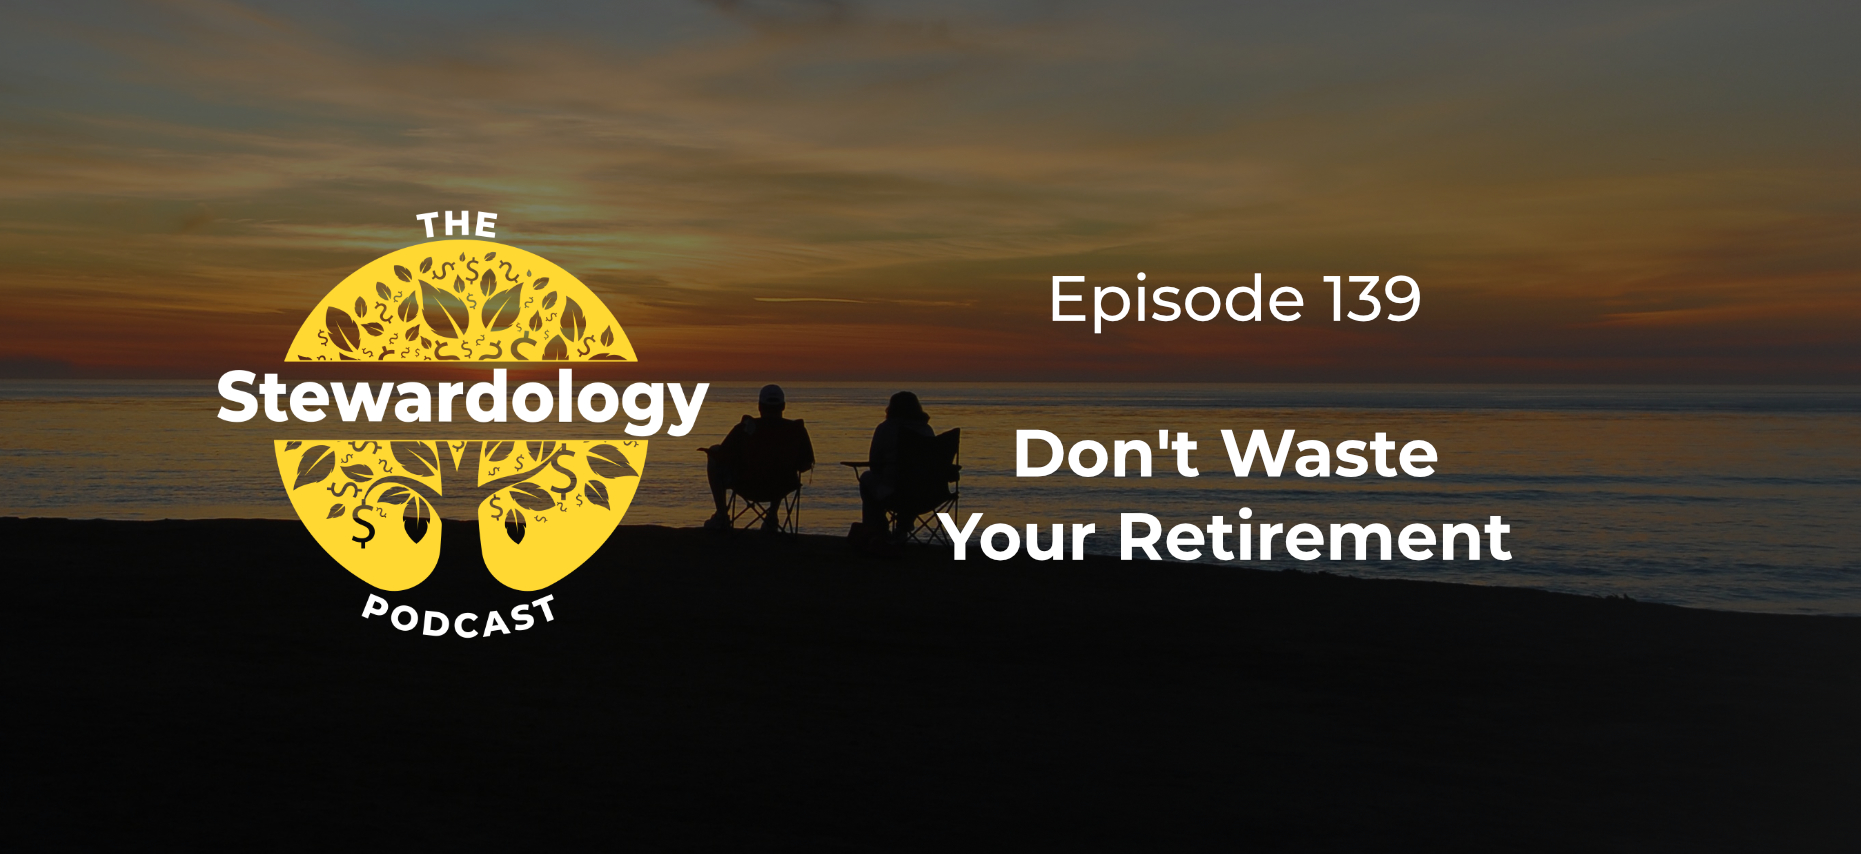 Don't waste your retirement